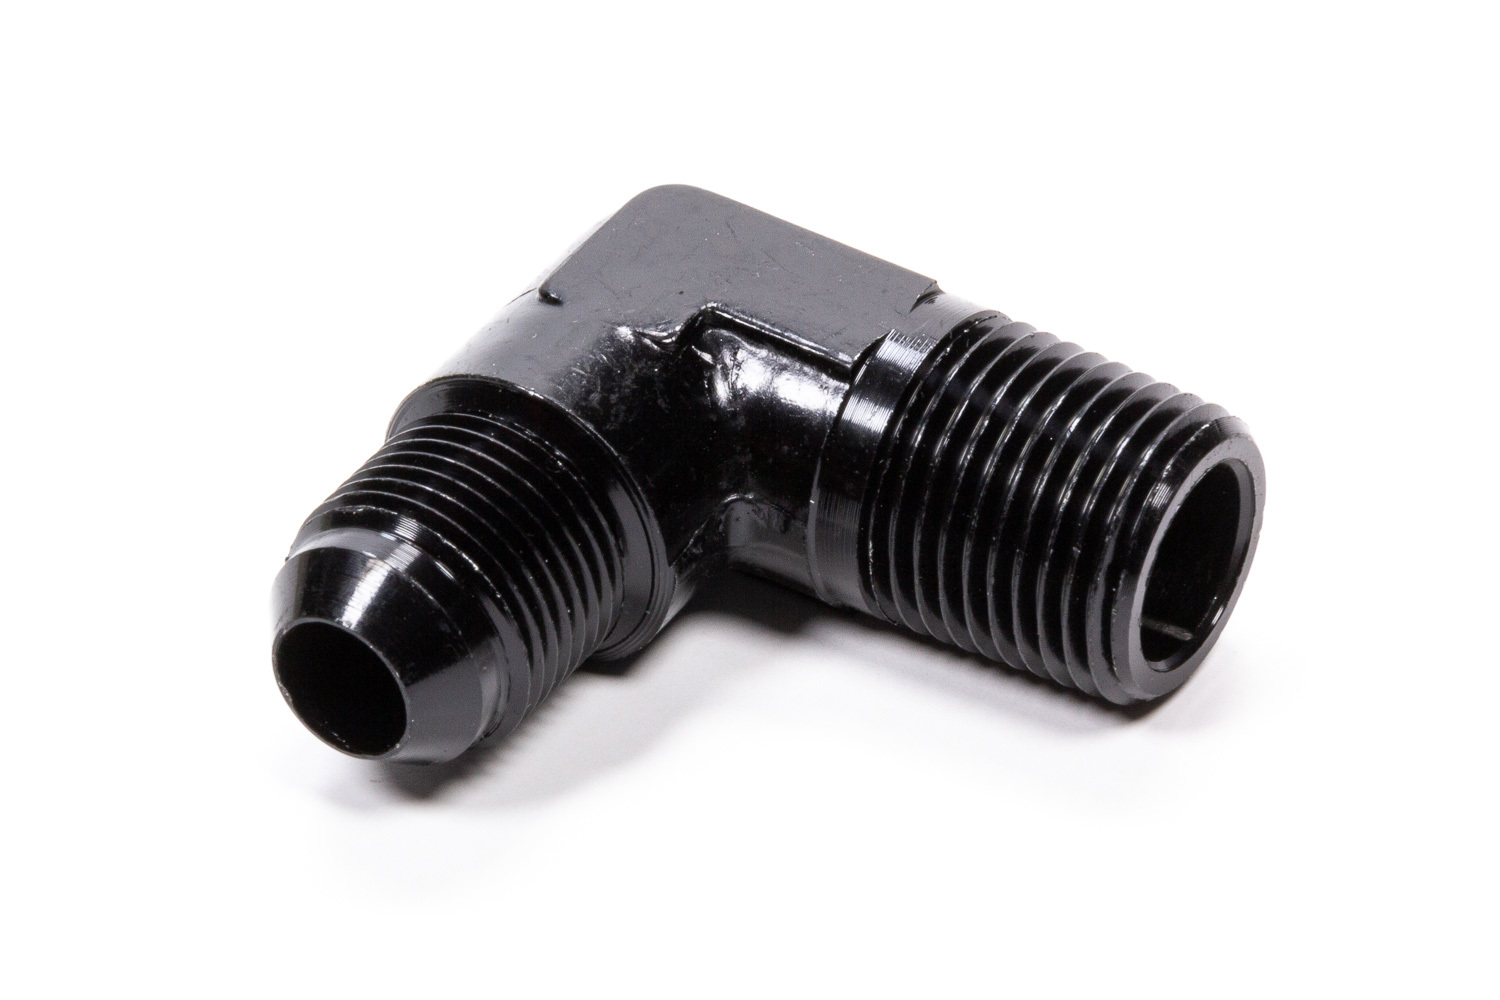 Fragola 482288-BL - Fitting, Adapter, 90 Degree, 8 AN Male to 1/2 in NPT Male, Aluminum, Black Anodized, Each